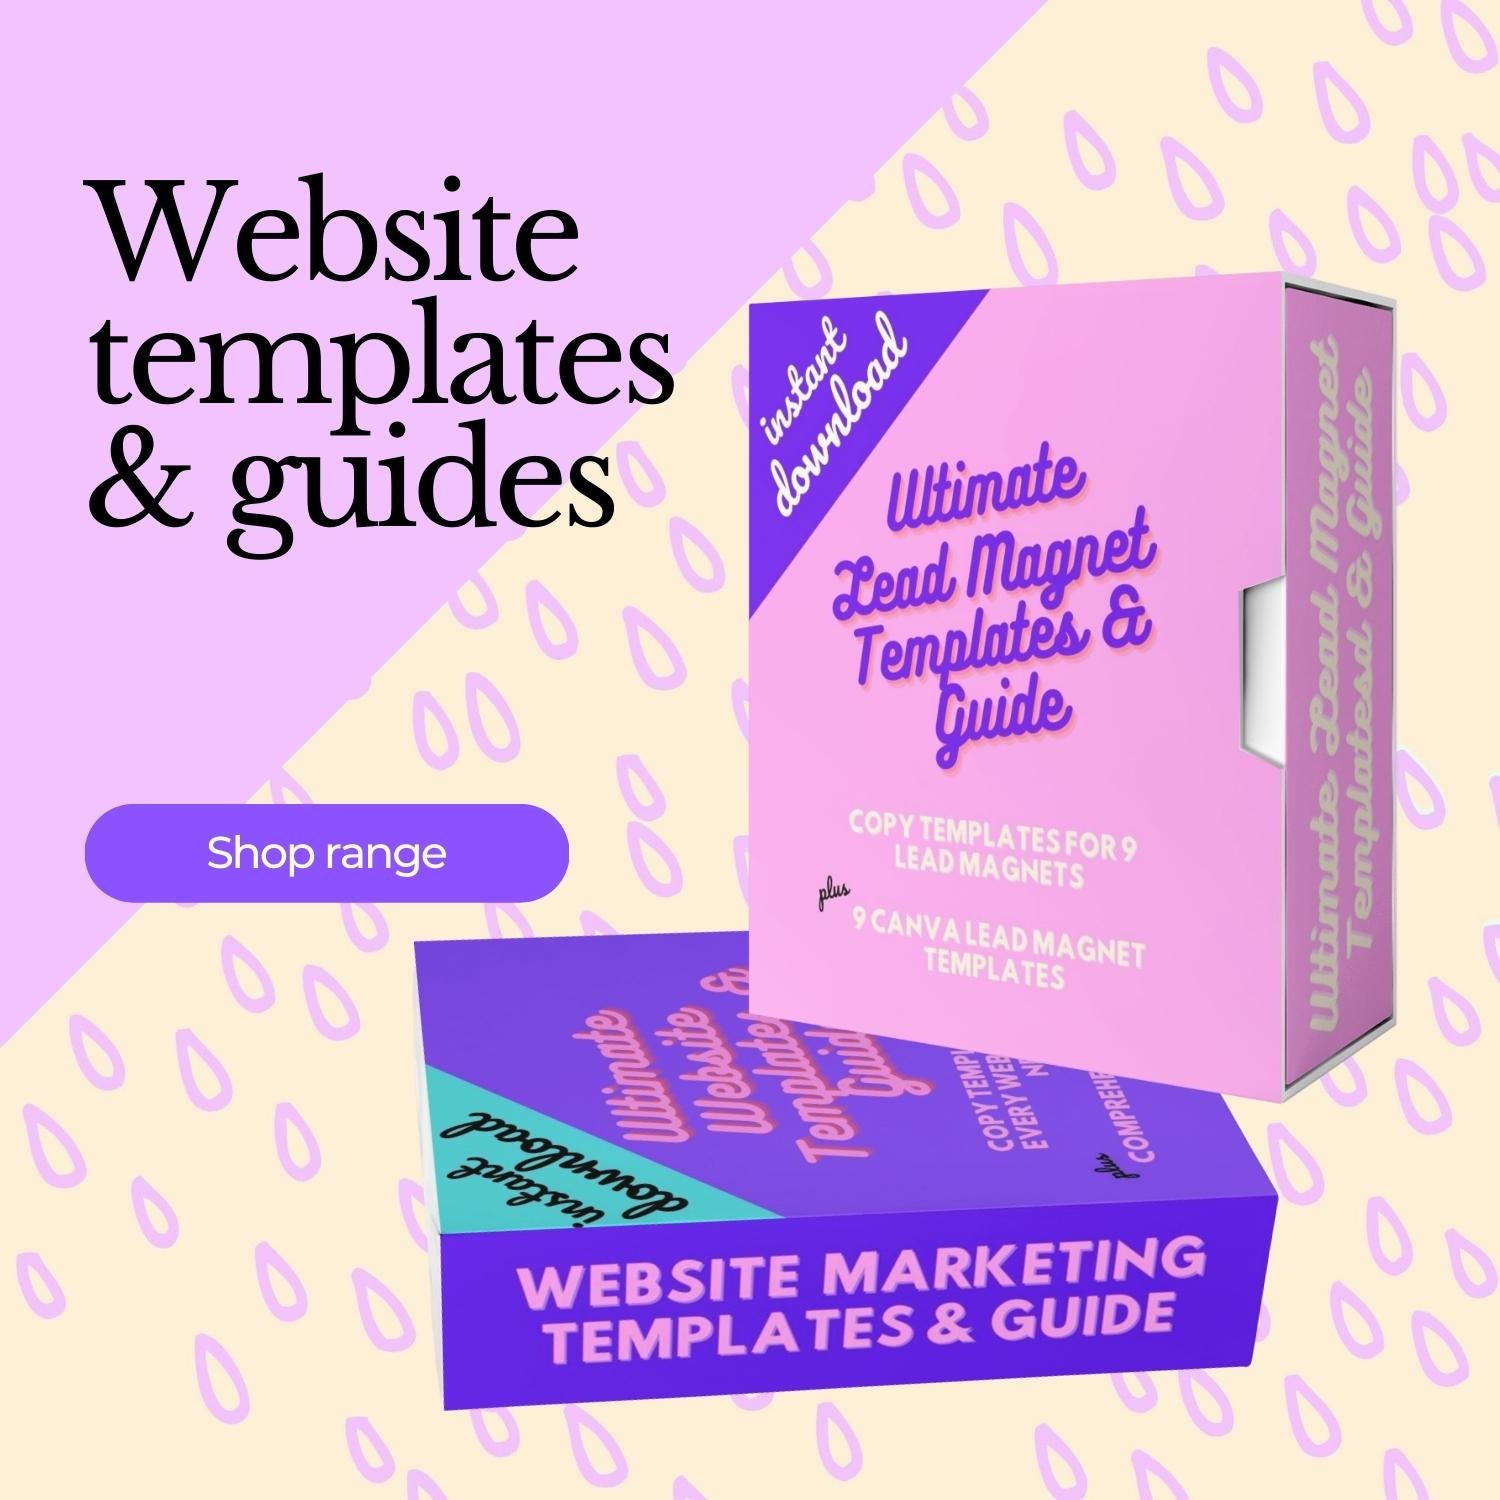 Templates & Guides